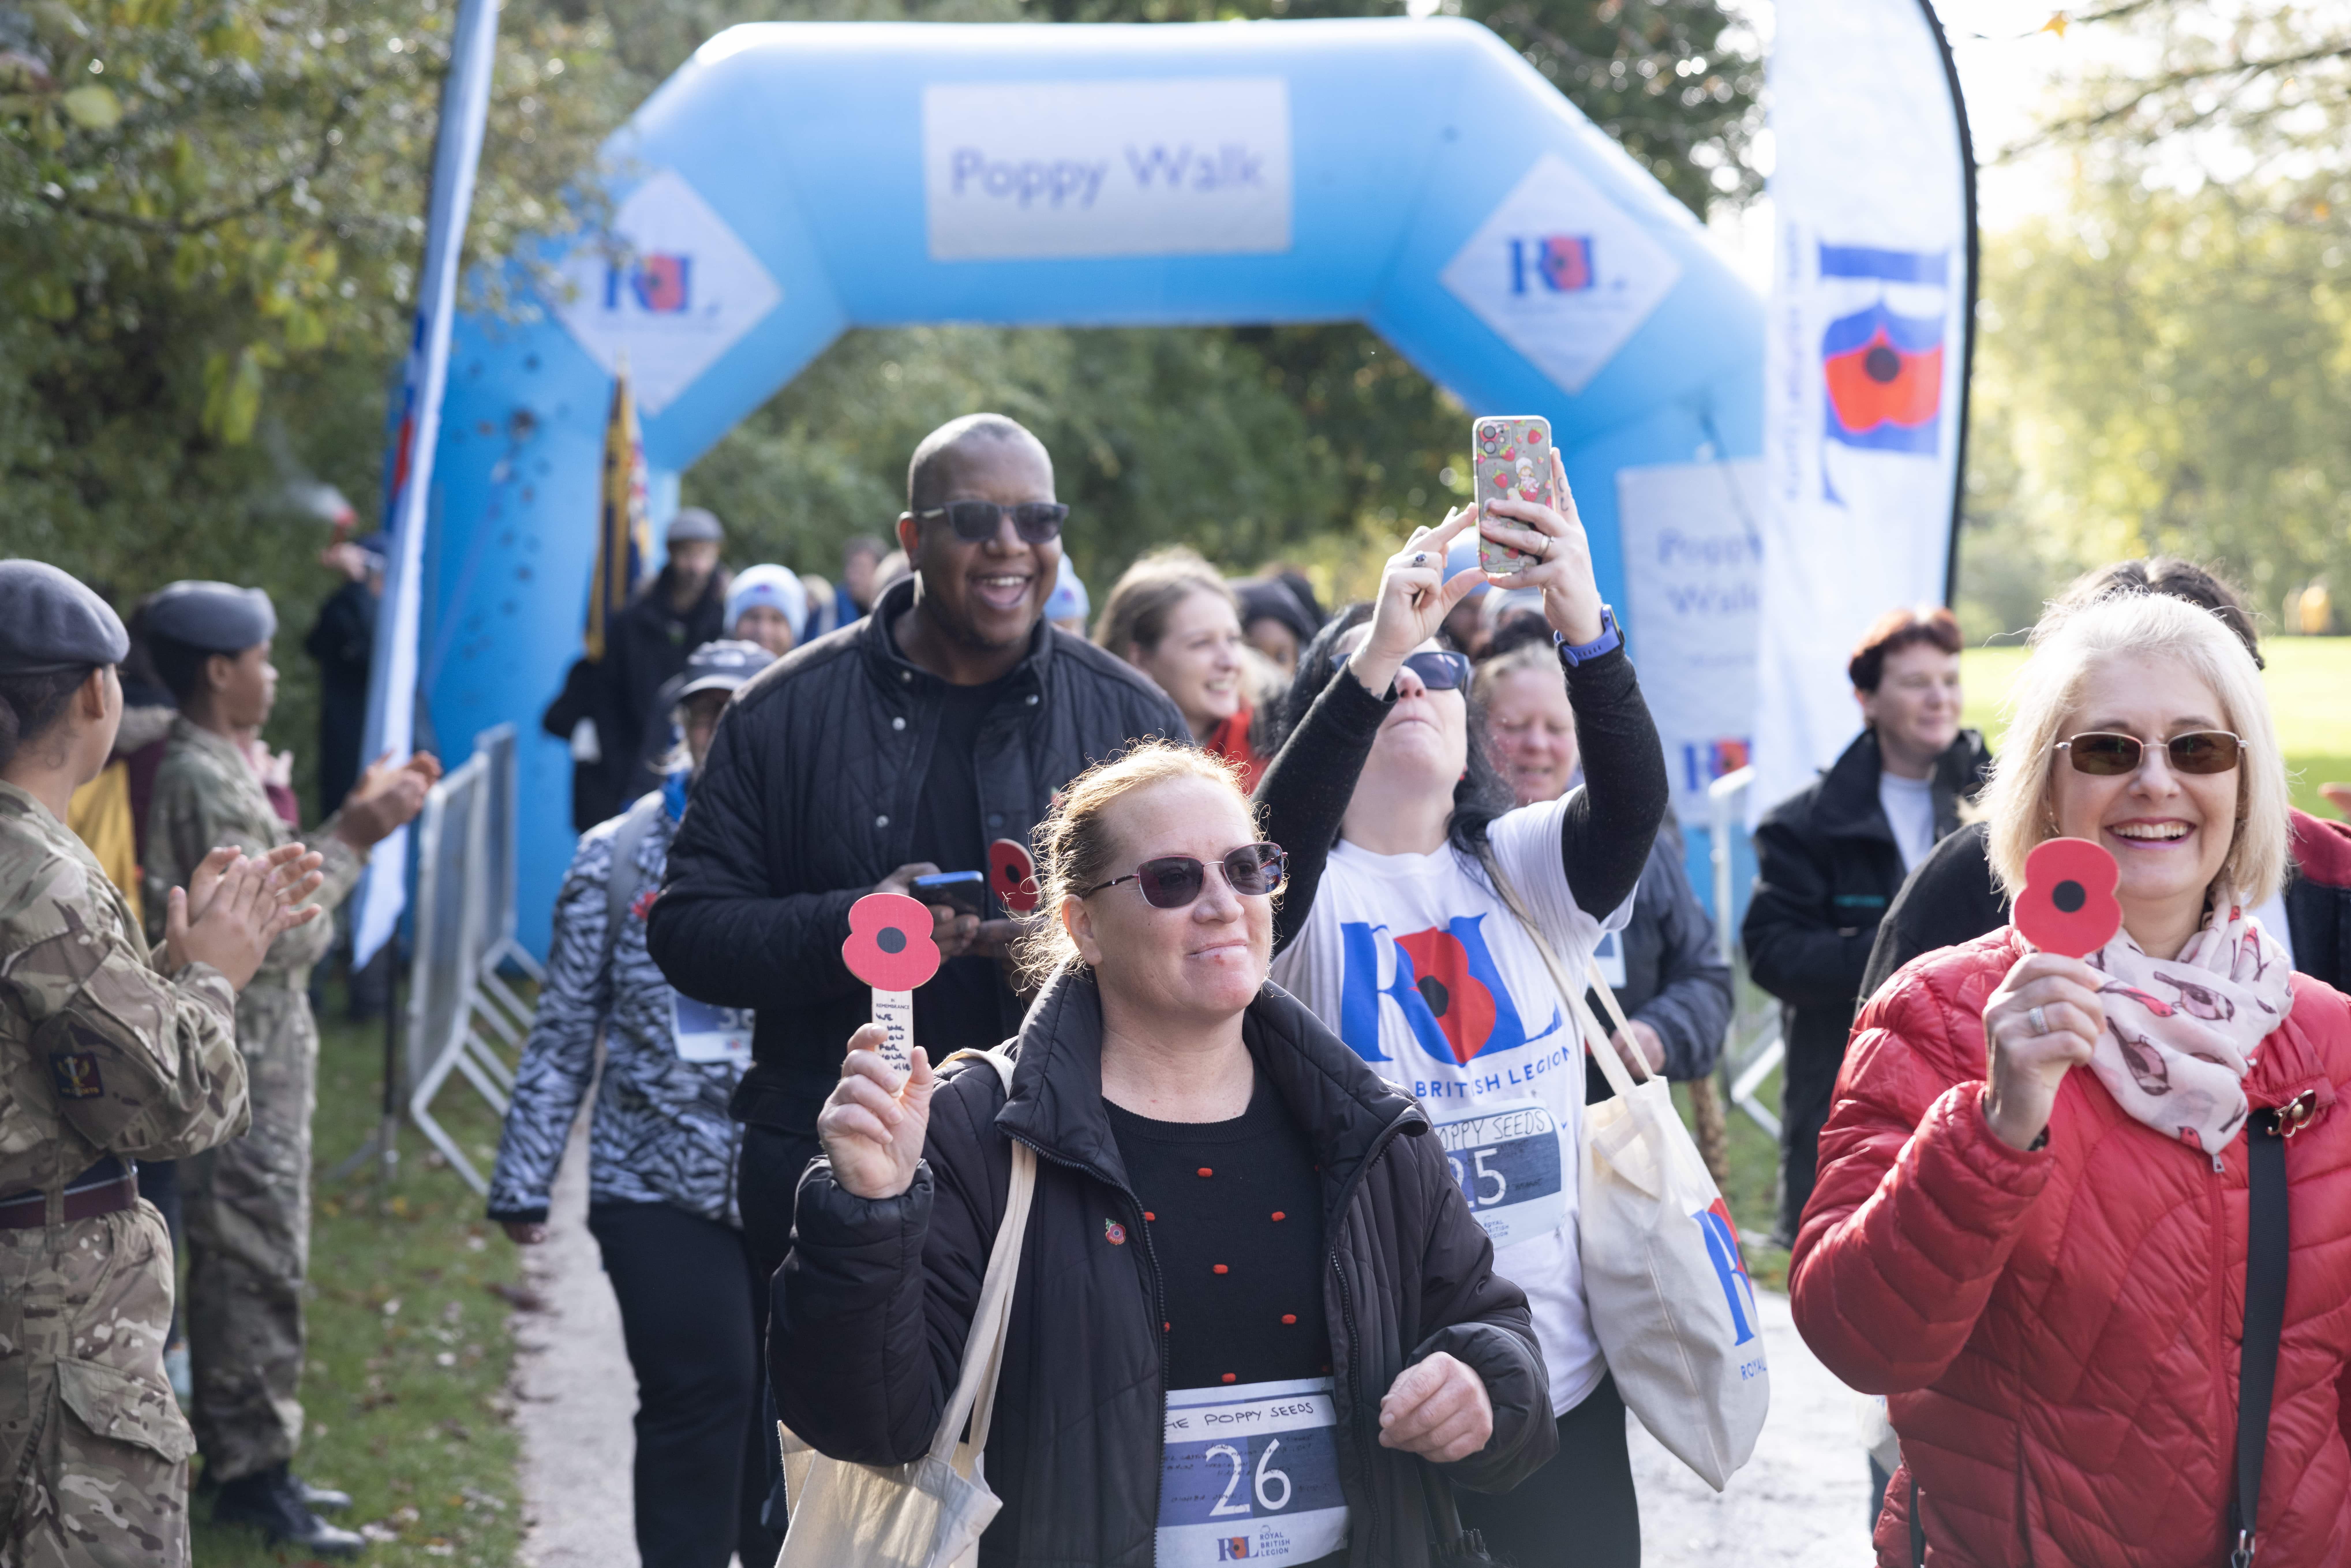 Participants completing Poppy Walk London 2023 - 105